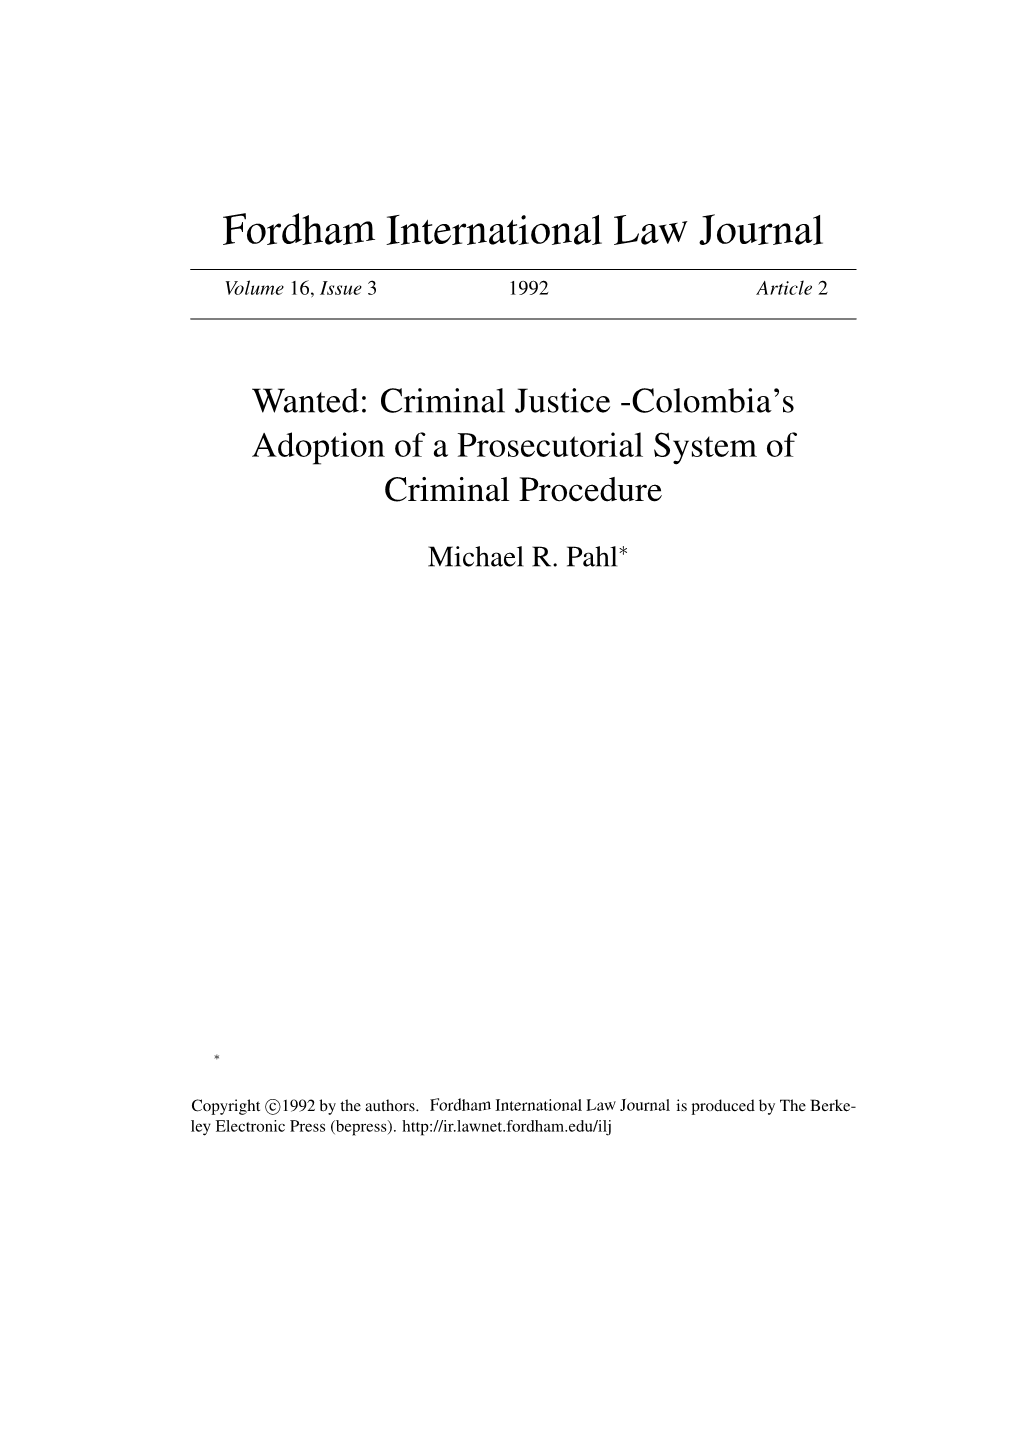 Wanted: Criminal Justice -Colombia's Adoption of a Prosecutorial System